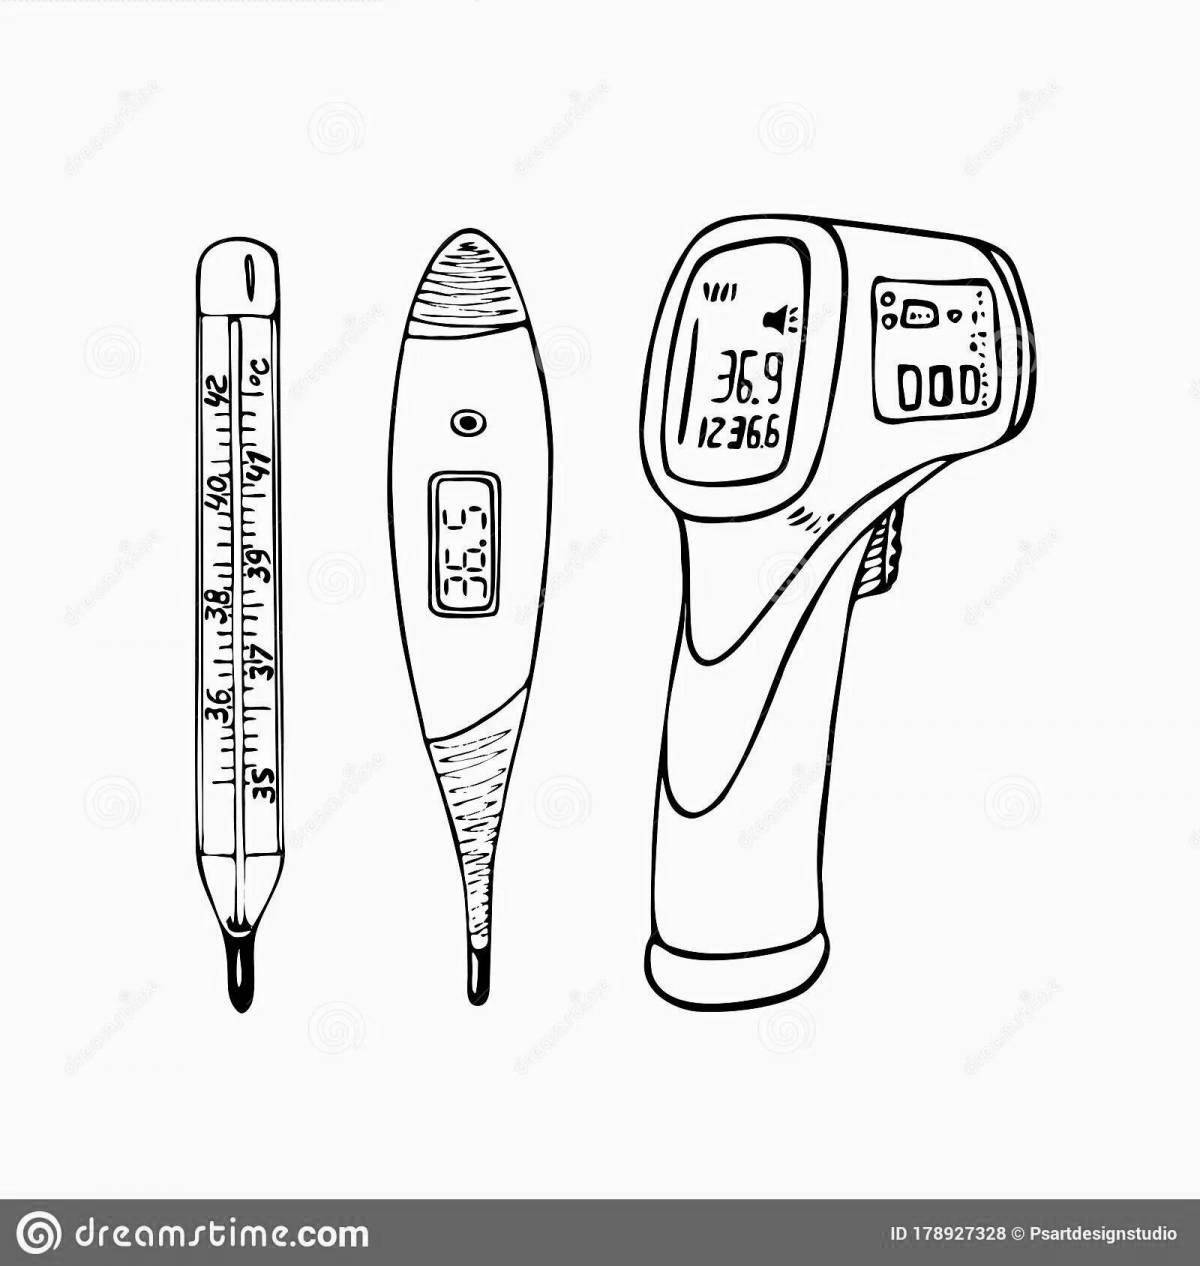 Playful thermometer coloring book for kids